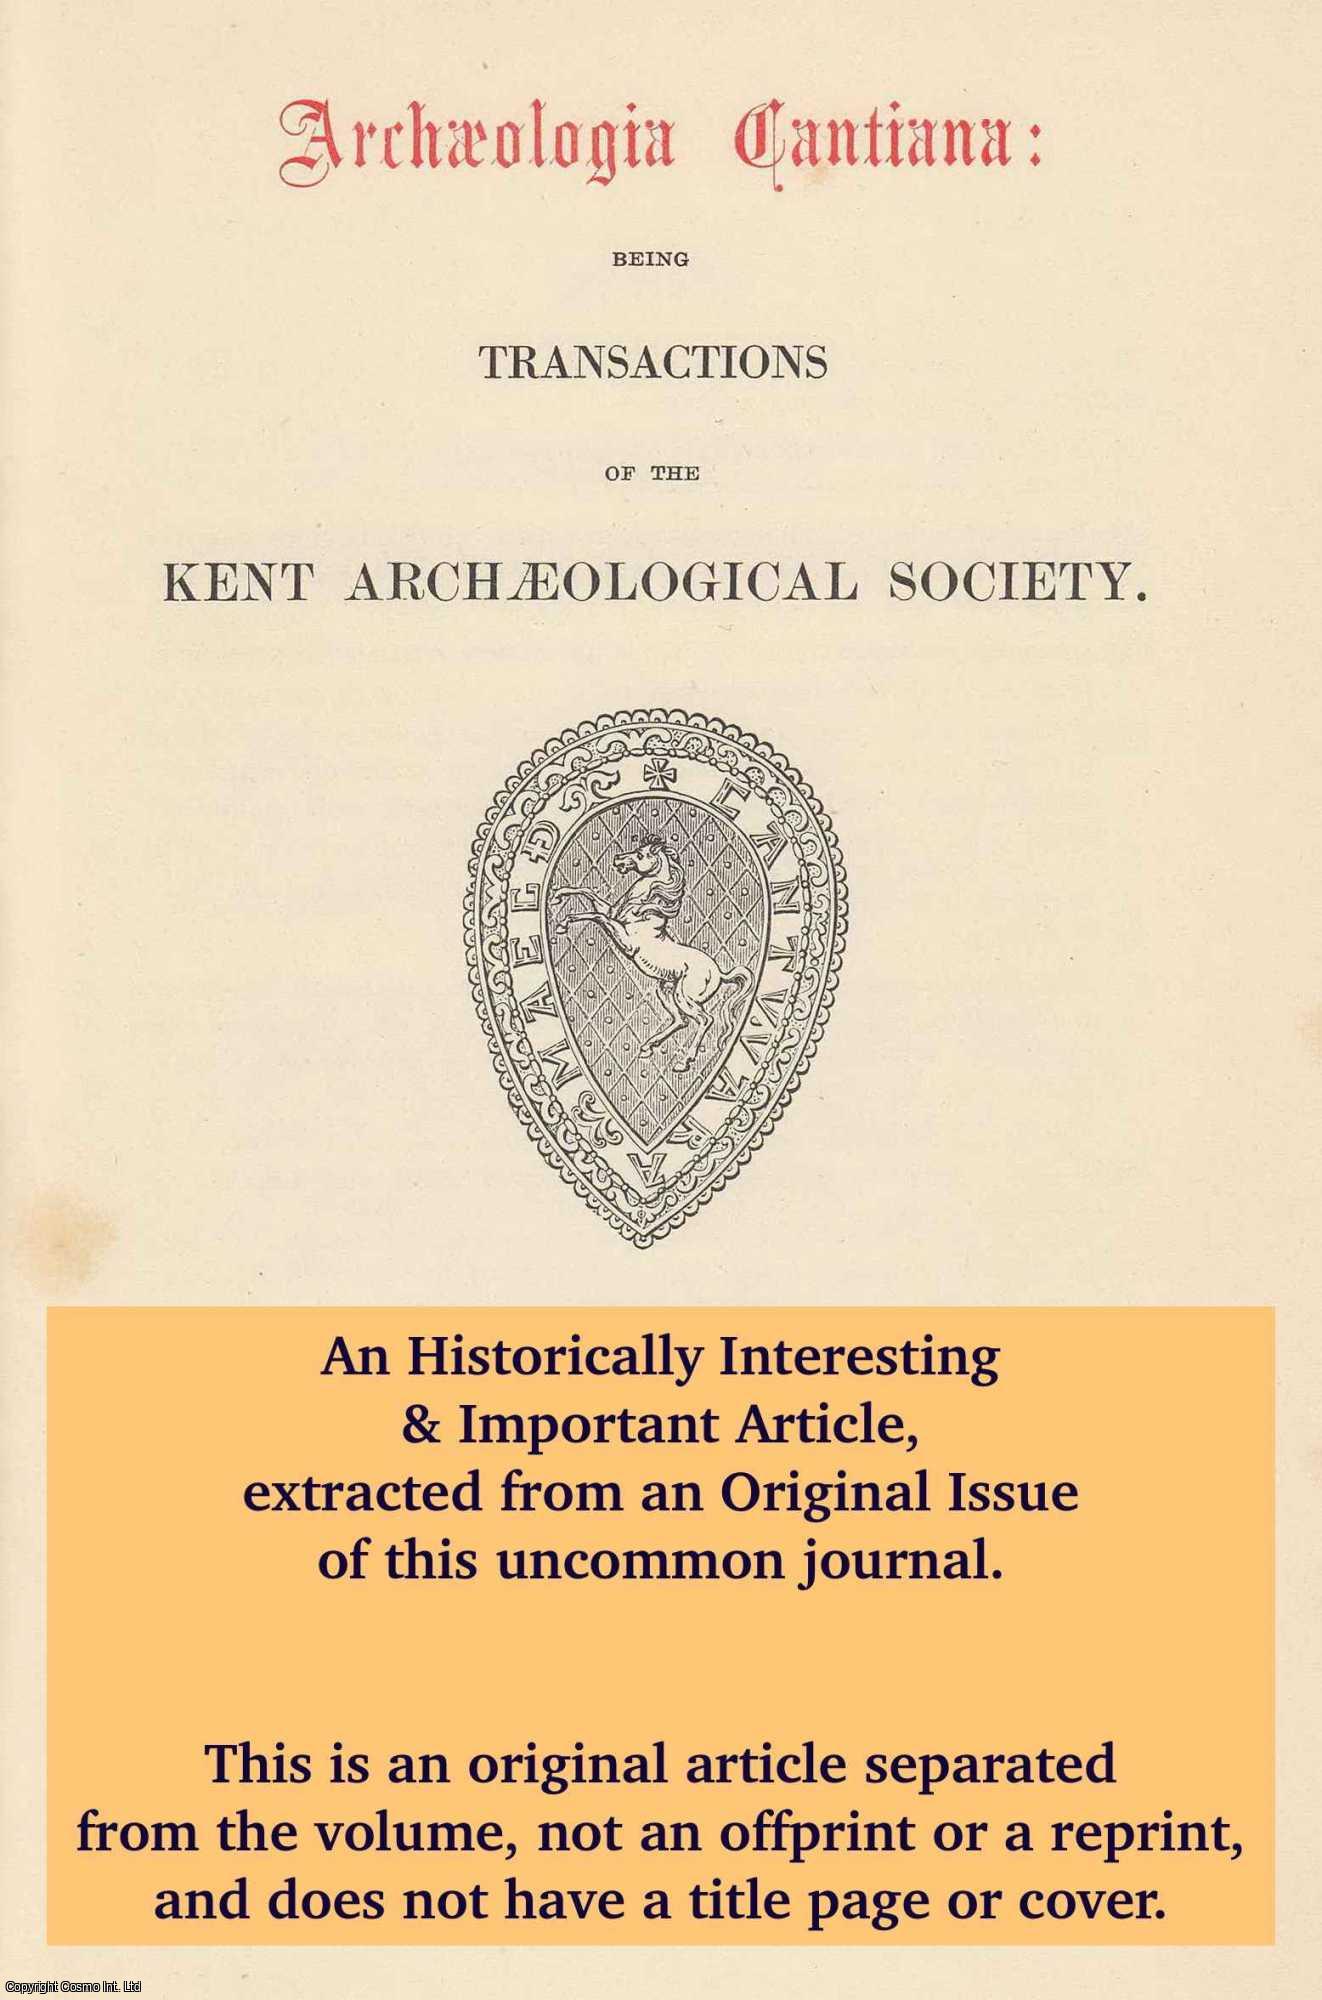 Edward Harrison - Oldbury Hill, Ightham. An original article from The Archaeologia Cantiana: Transactions of The Kent Archaeological Society, 1933.